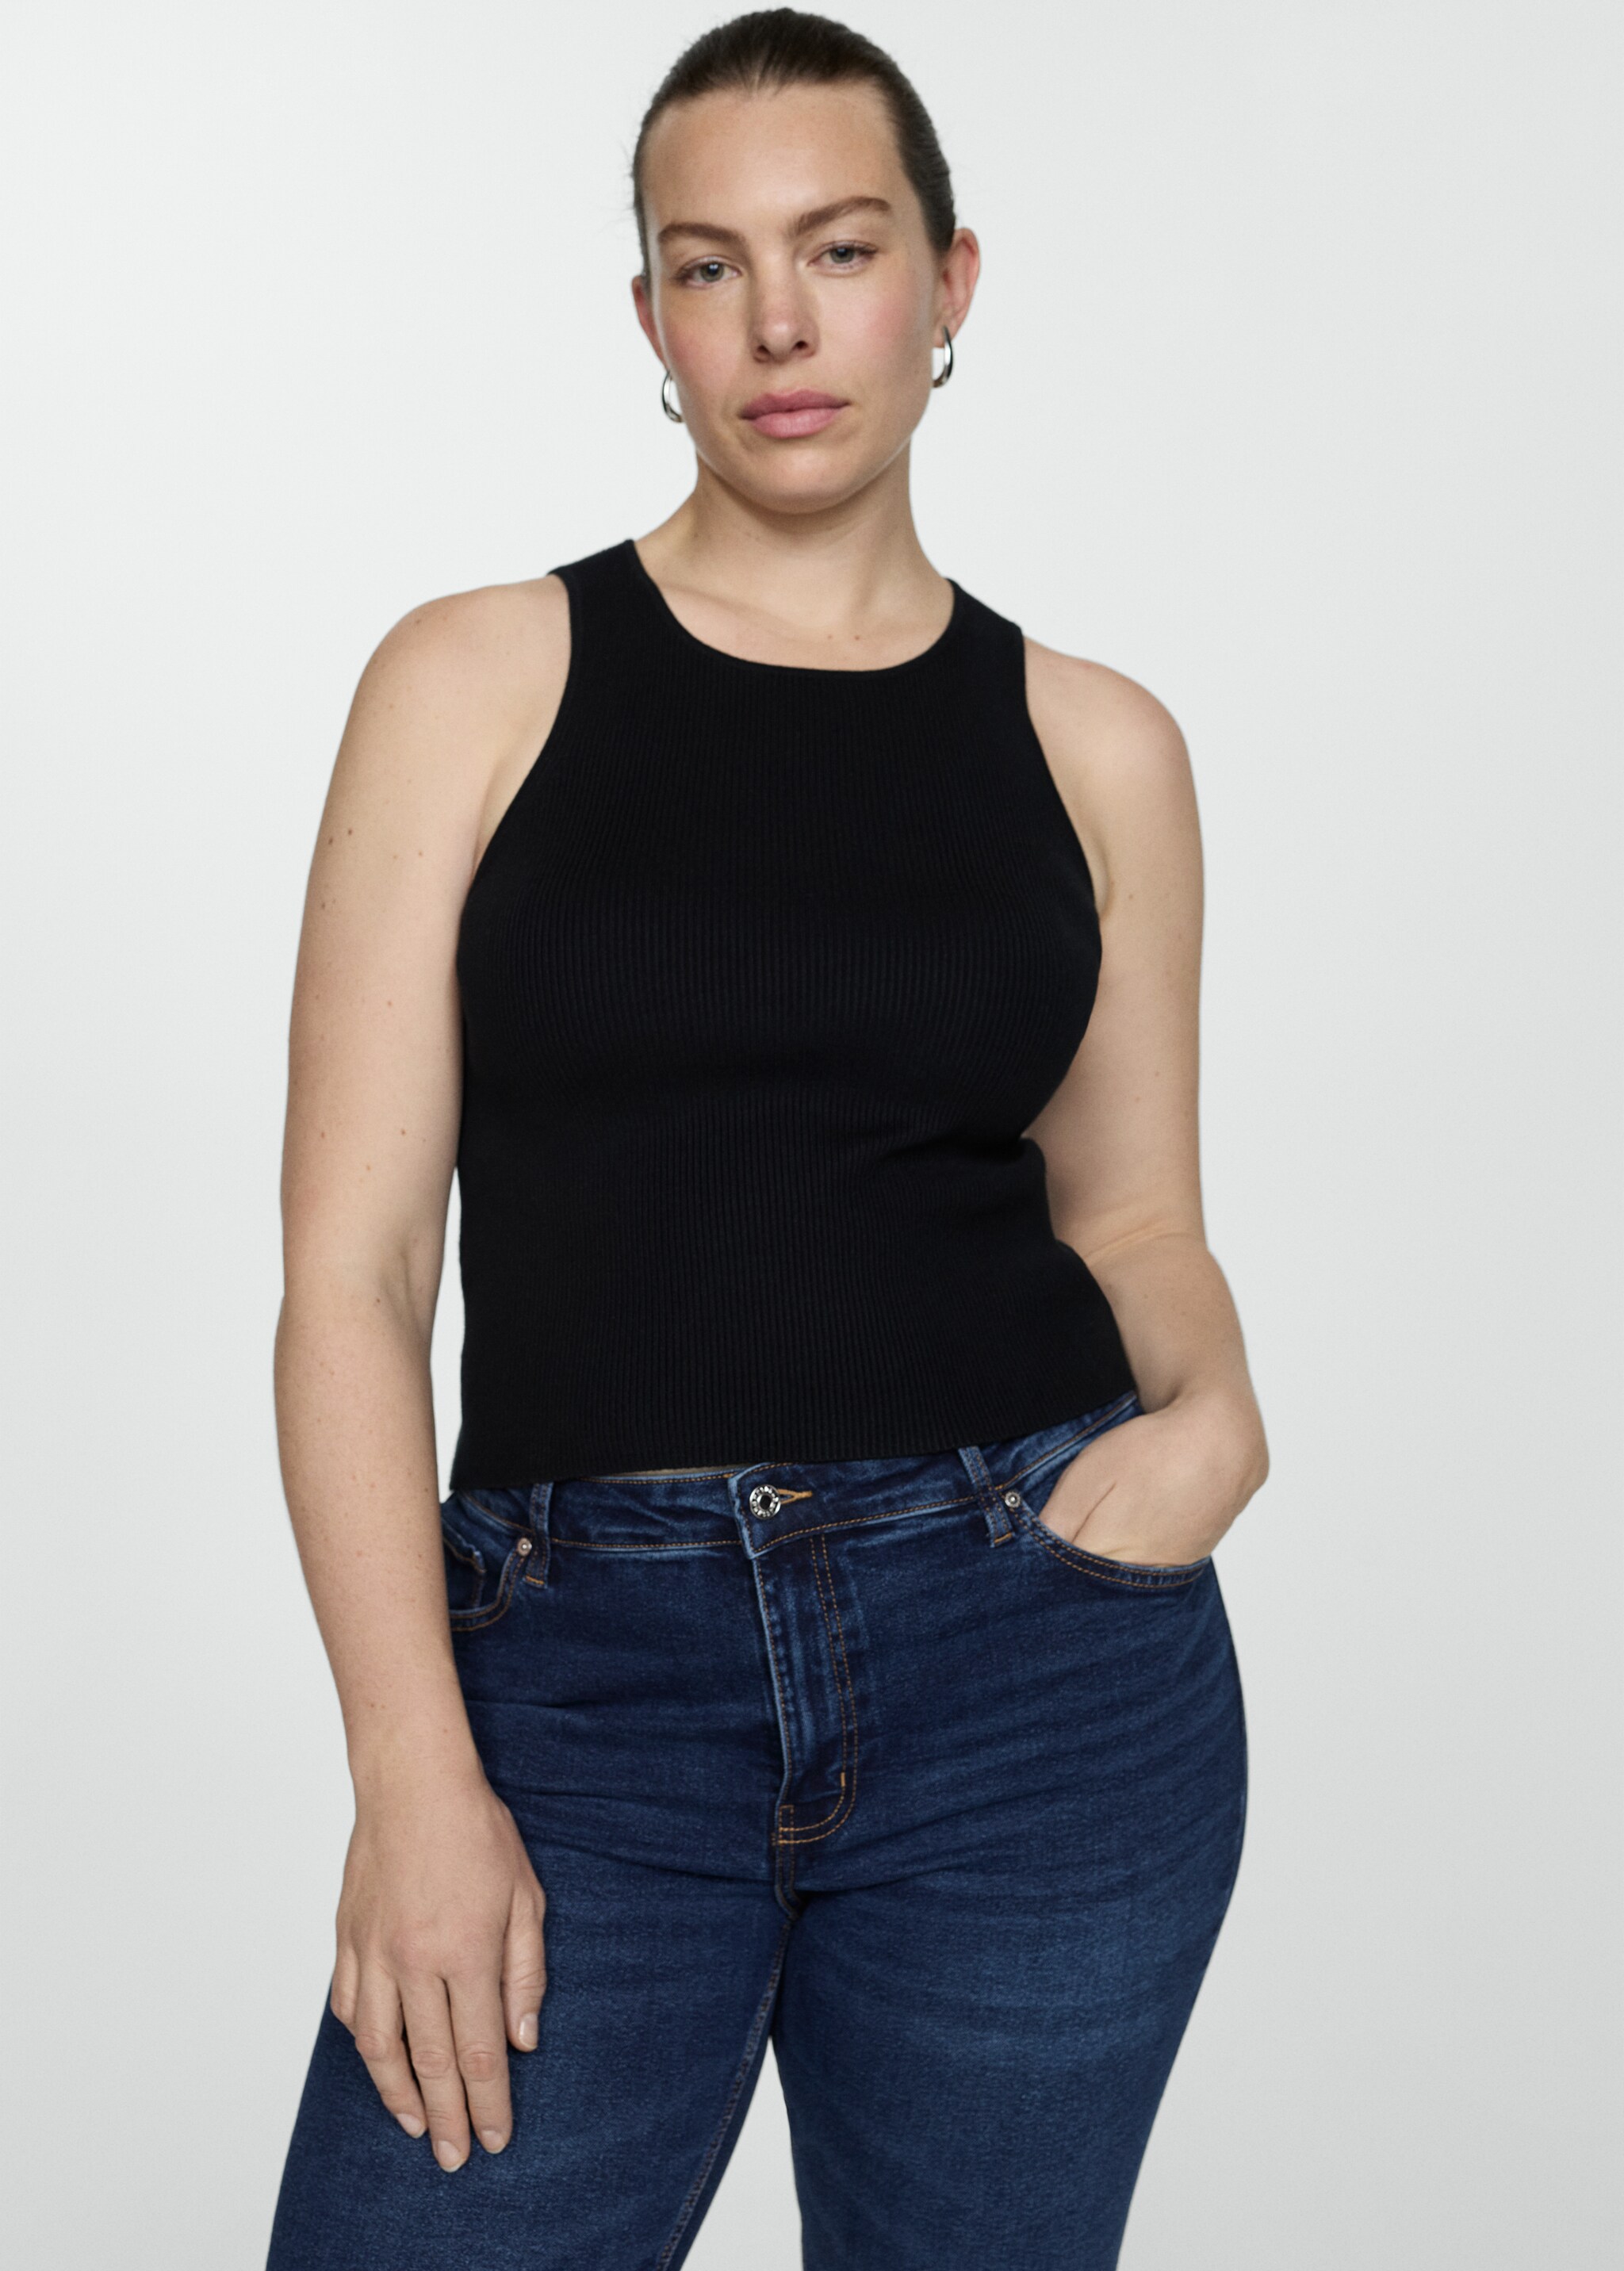 Jeans Sienna flare crop - Details of the article 5